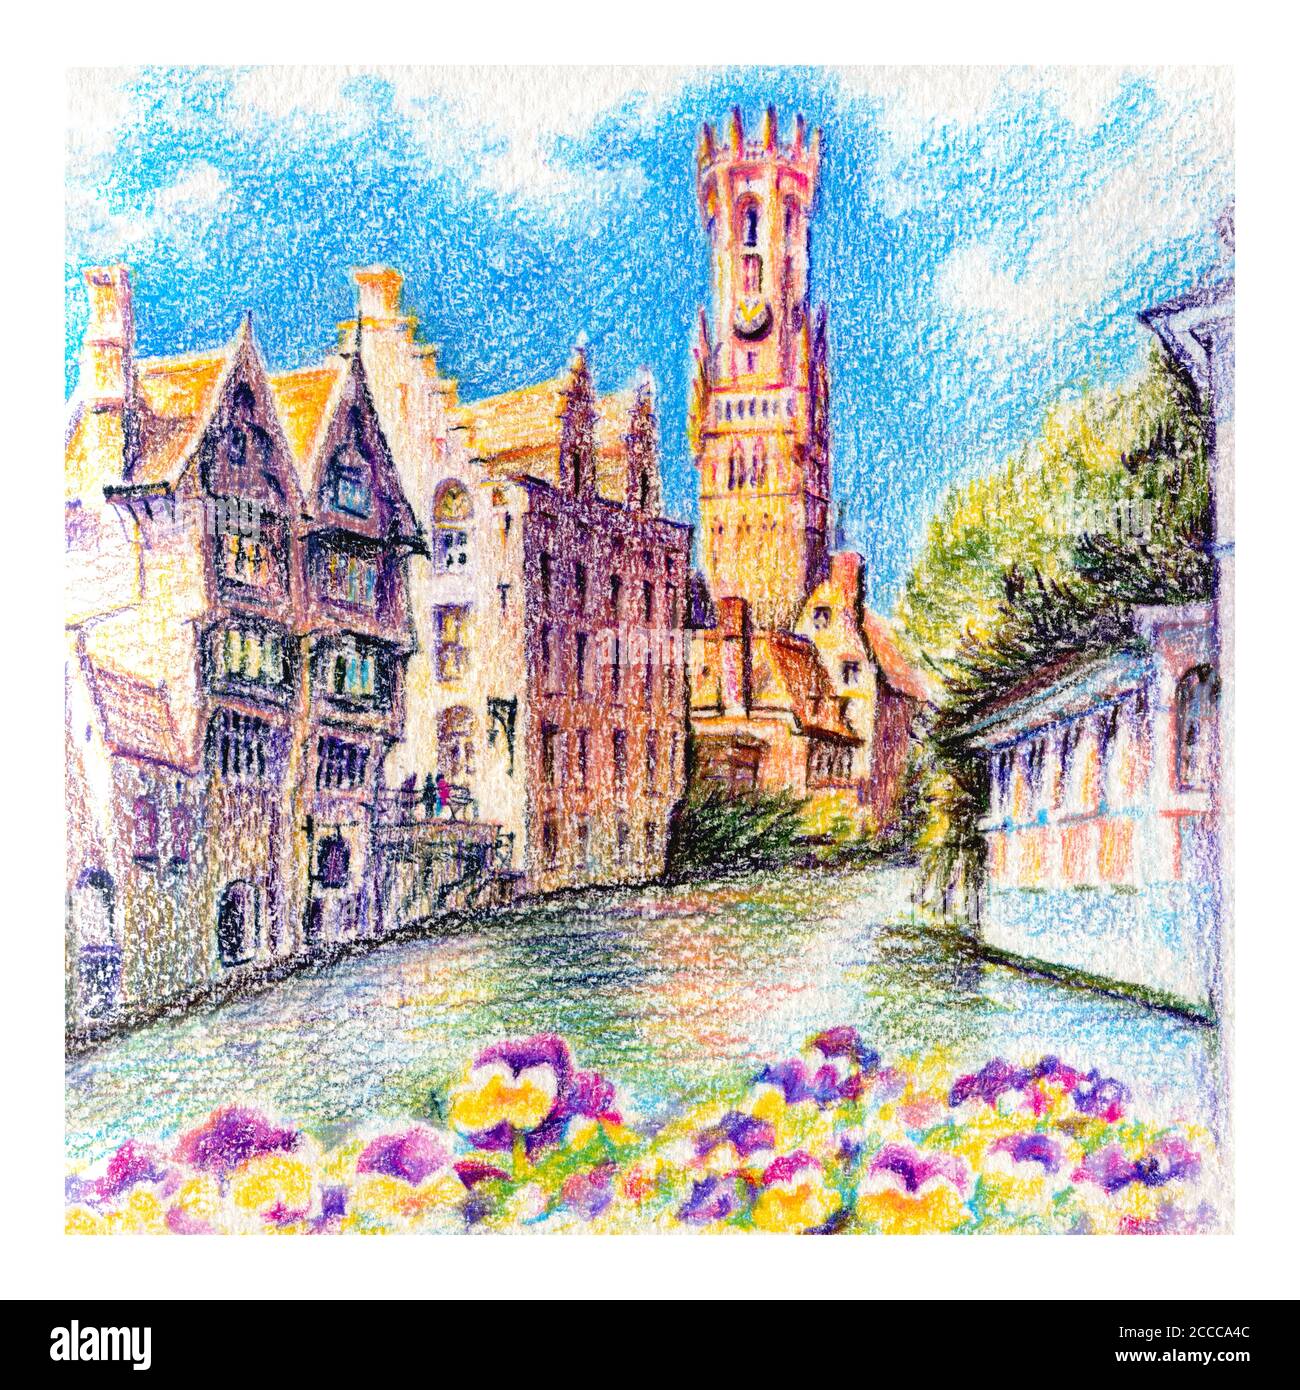 Urban sketch of Rozenhoedkaai canal in Bruges with the belfry in the background, Belgium. Drawing with colored pencils Stock Photo